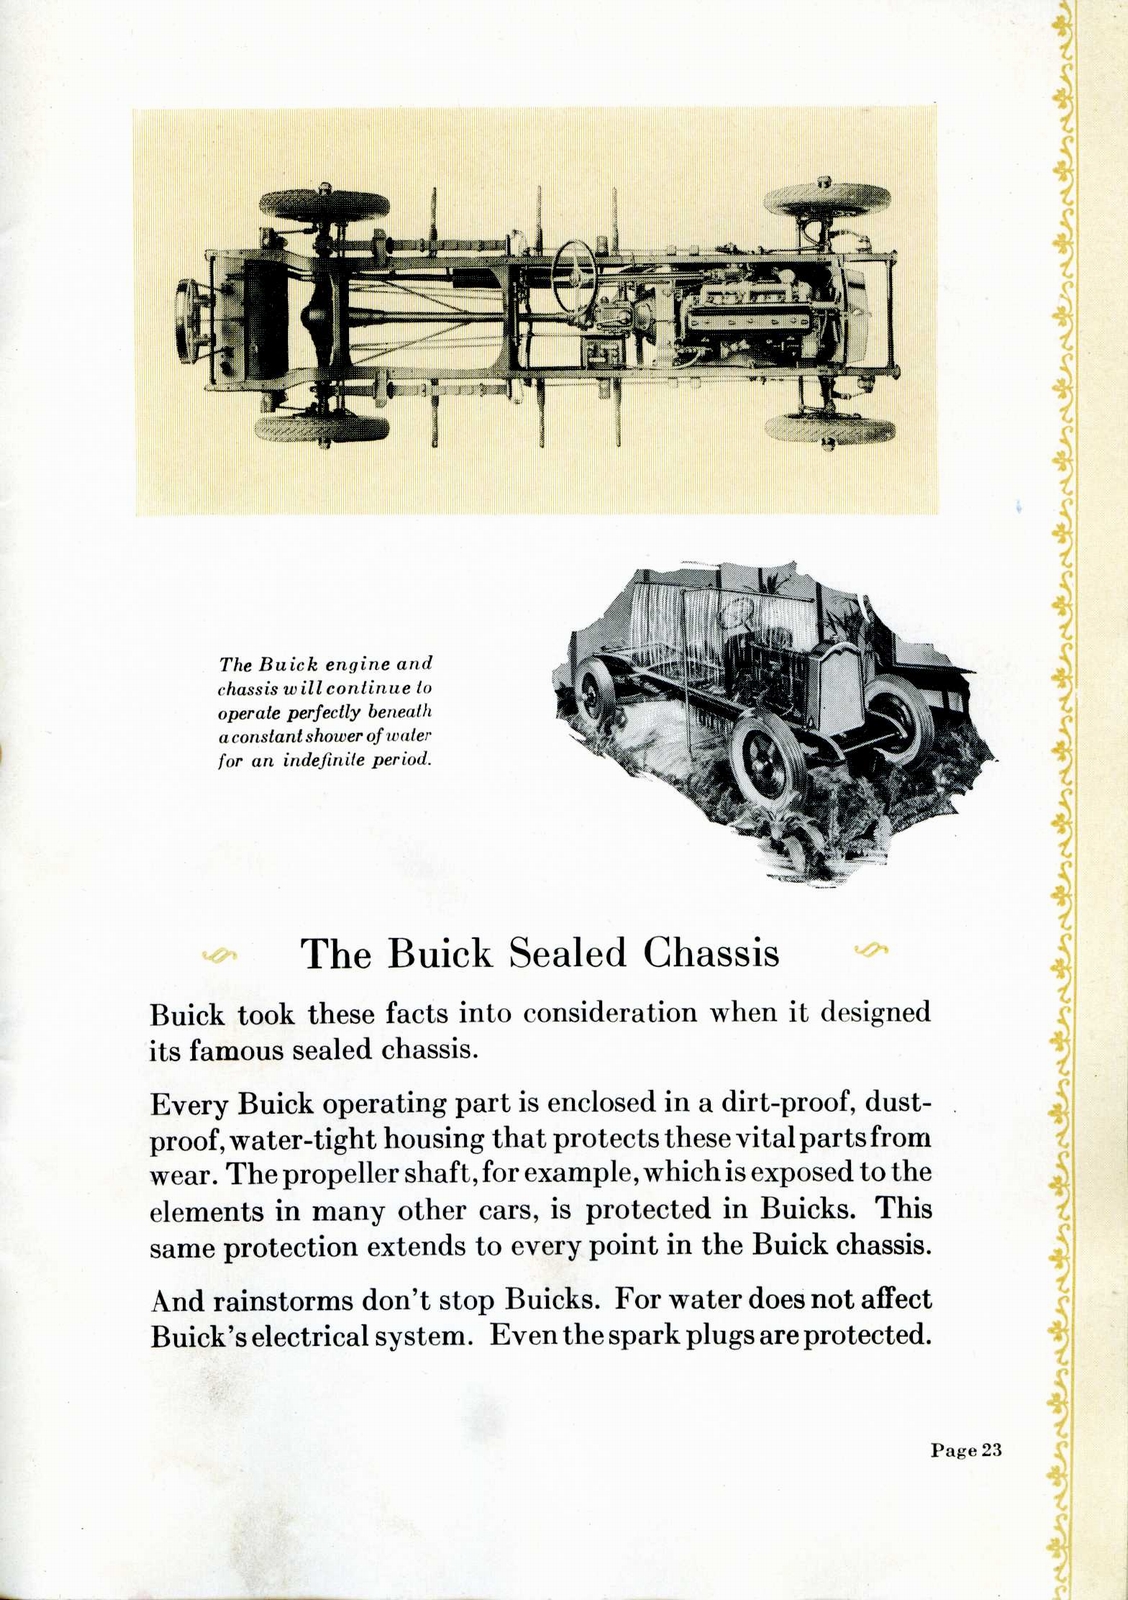 n_1928 Buick-How to Choose a Motor Car Wisely-23.jpg